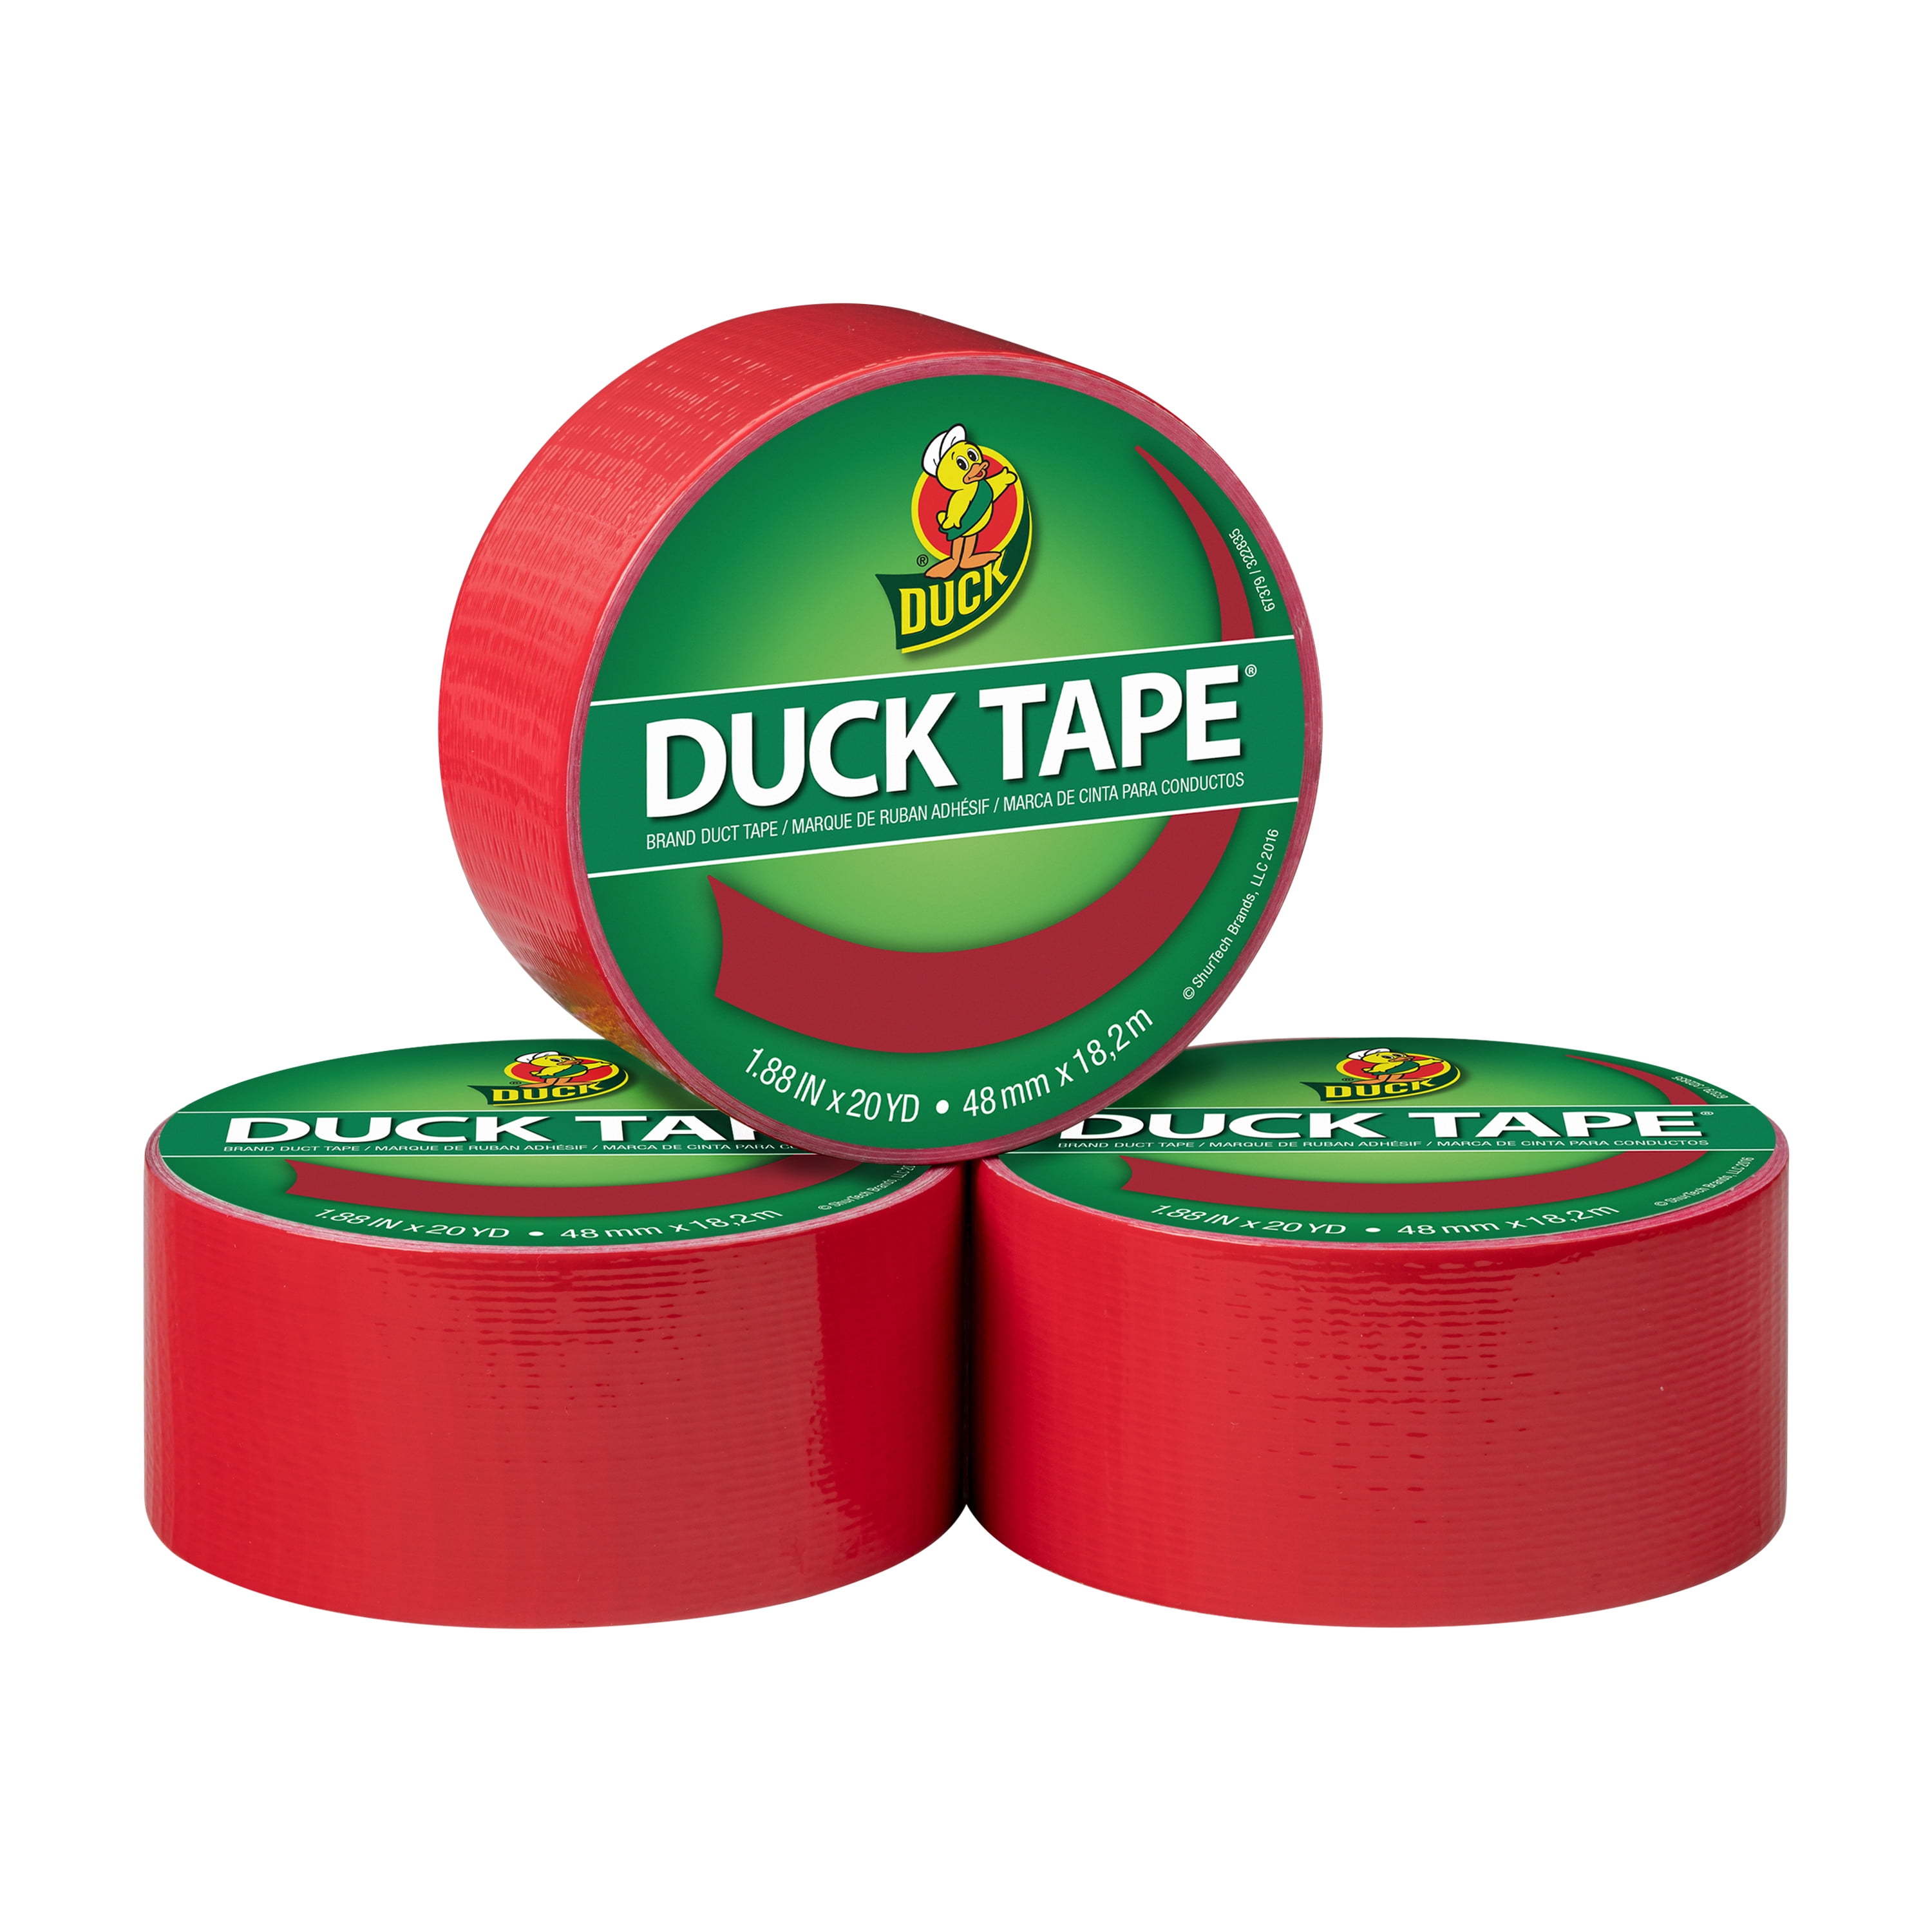 Duck Tape Printed Duct Tape, Americana Red, White and Blue, 1.88 x 10  Yards